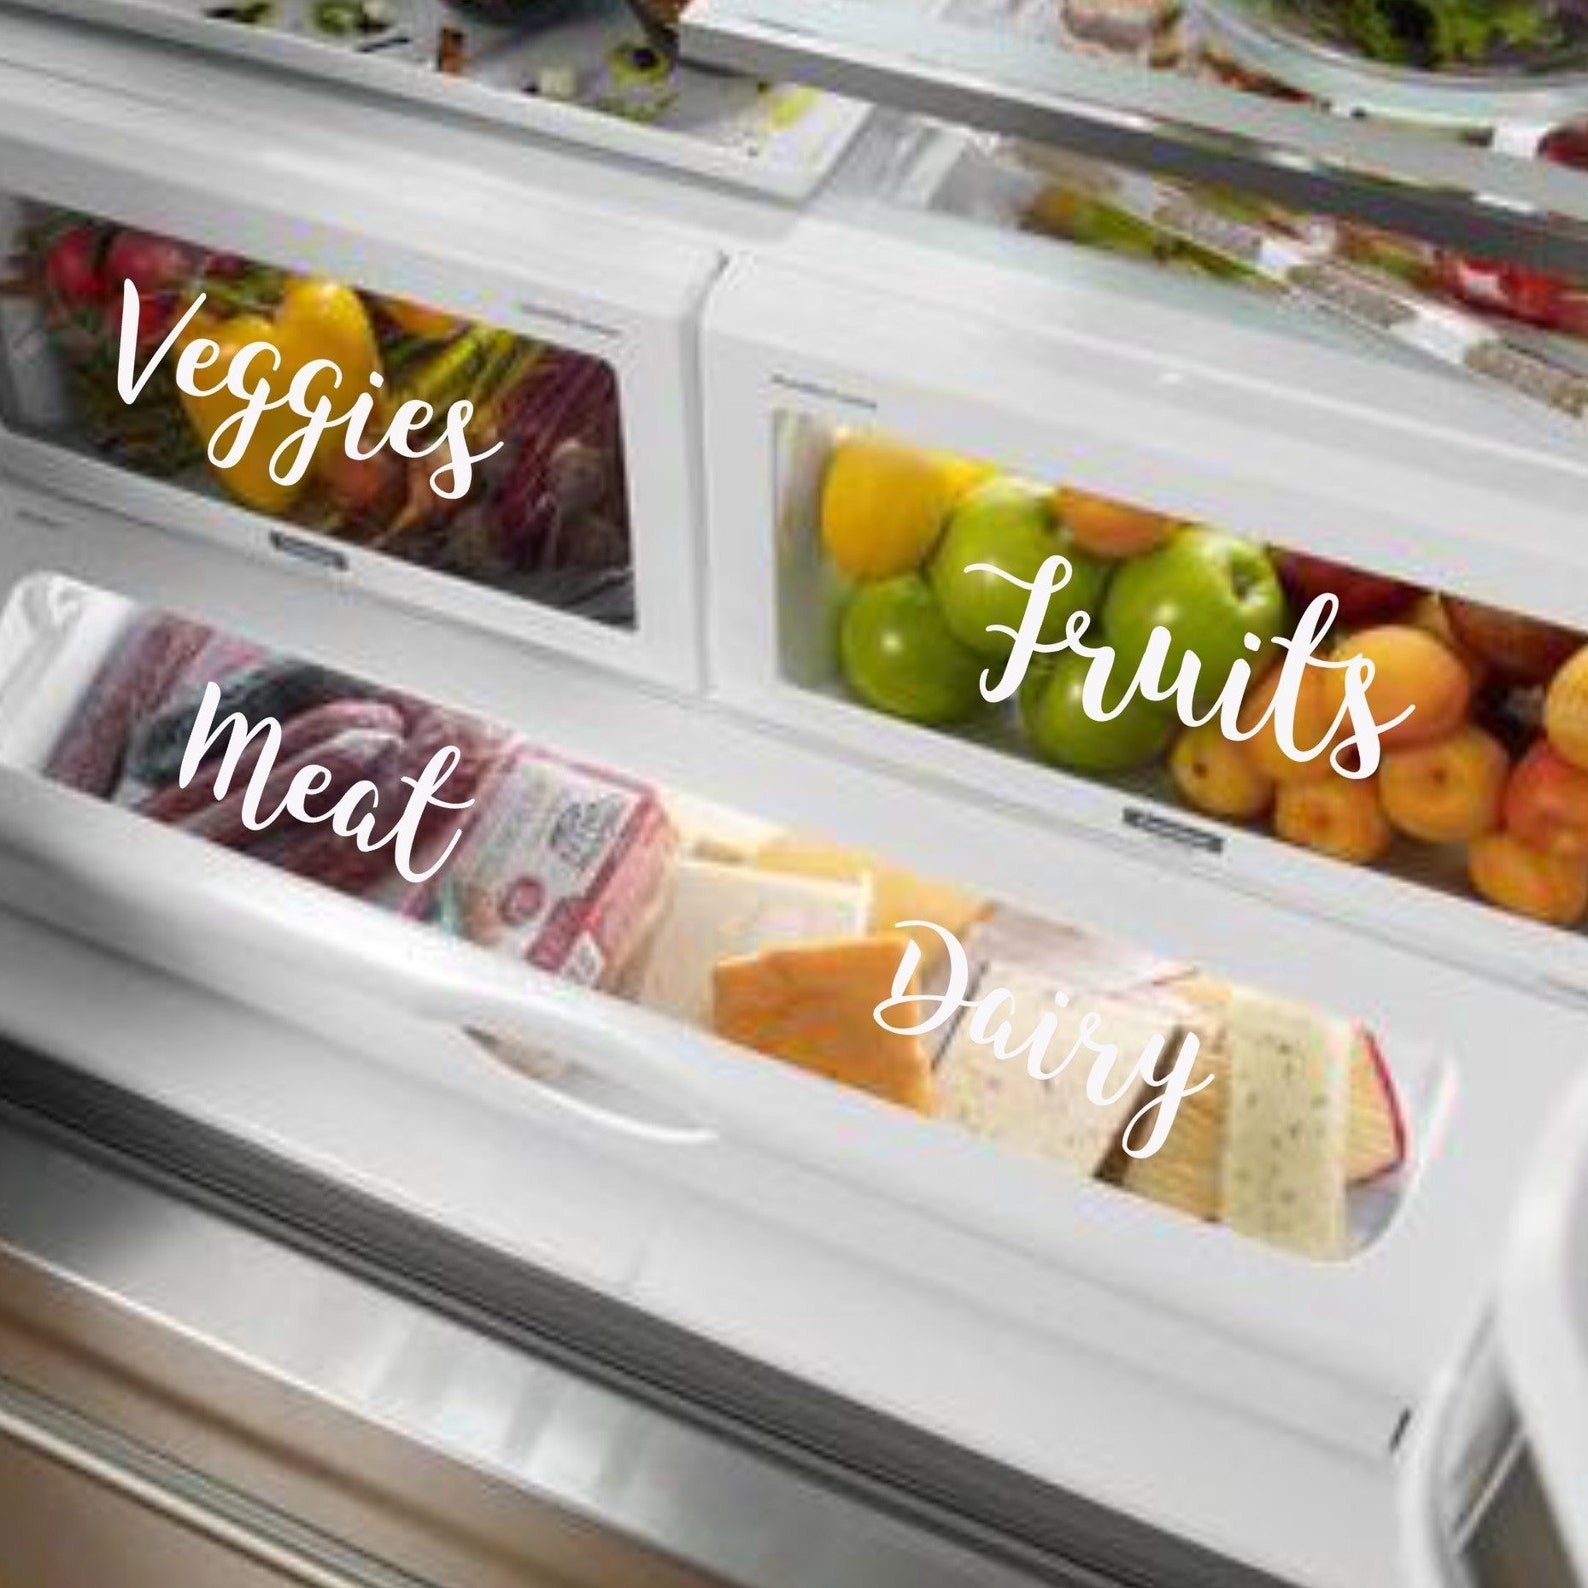 fridge with bins labeled veggies, fruits, meat, dairy in a white cursive font